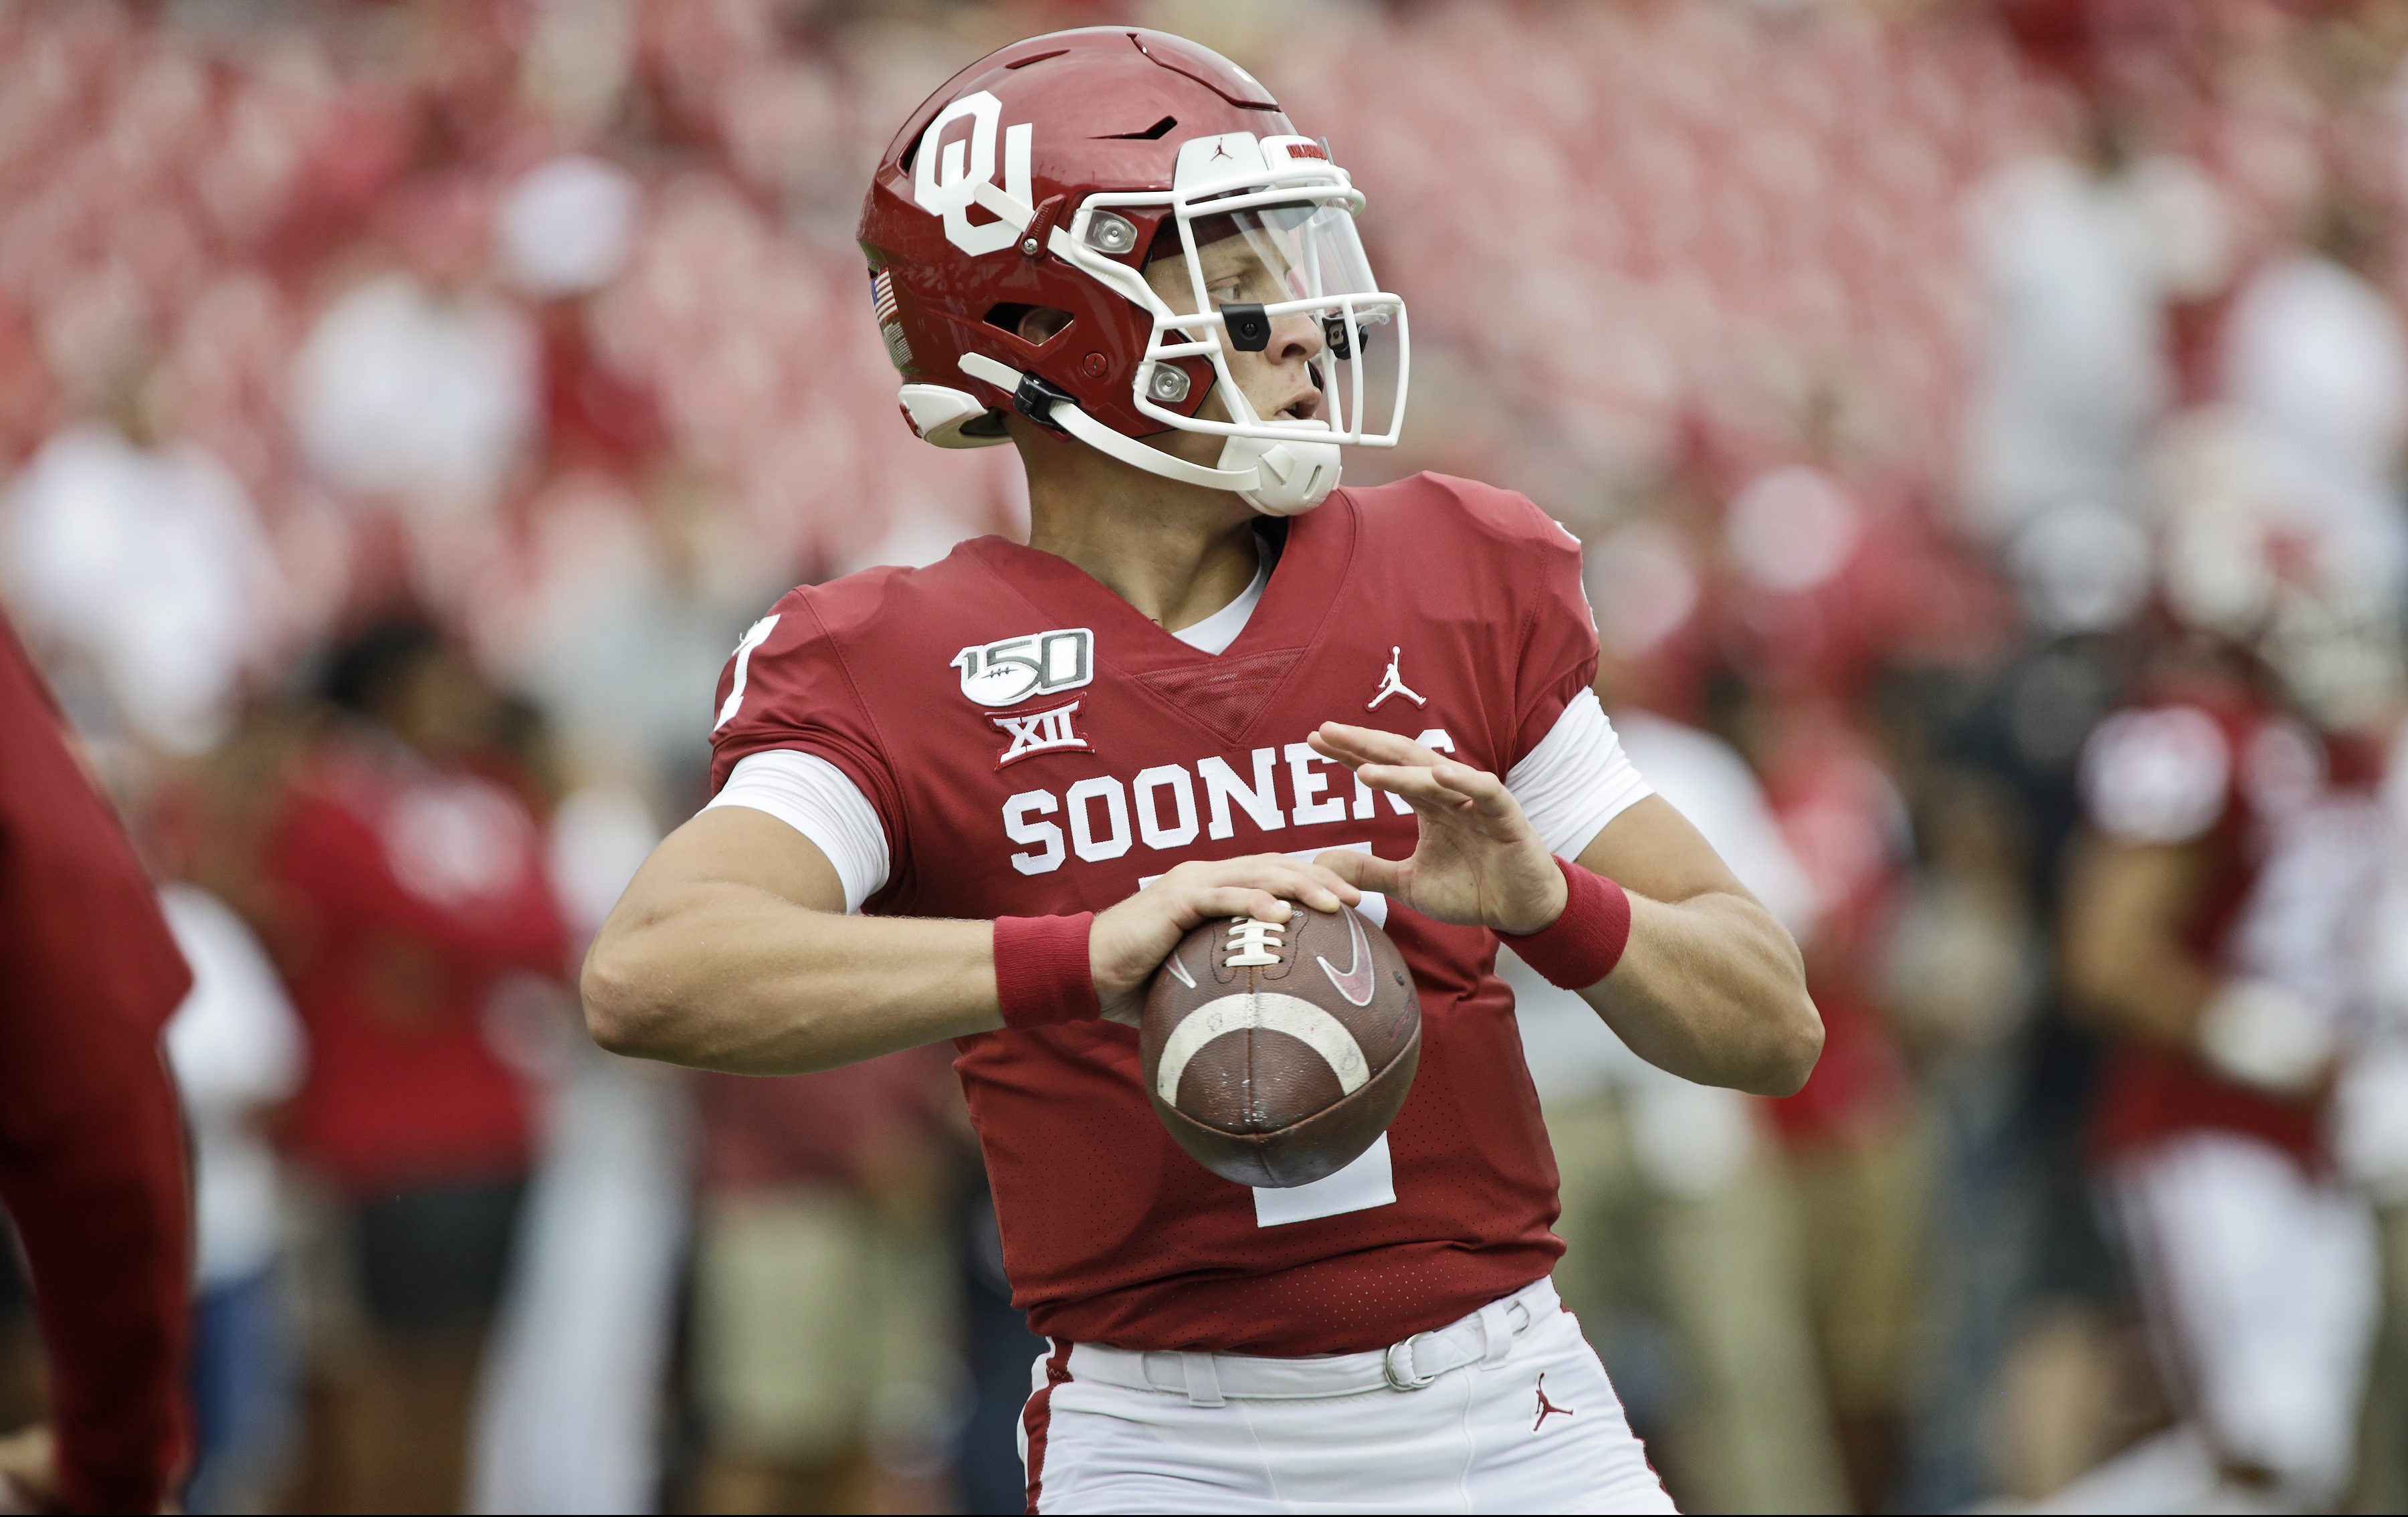 Bedlam 2020 Live Stream How to Watch OK St vs OU Online